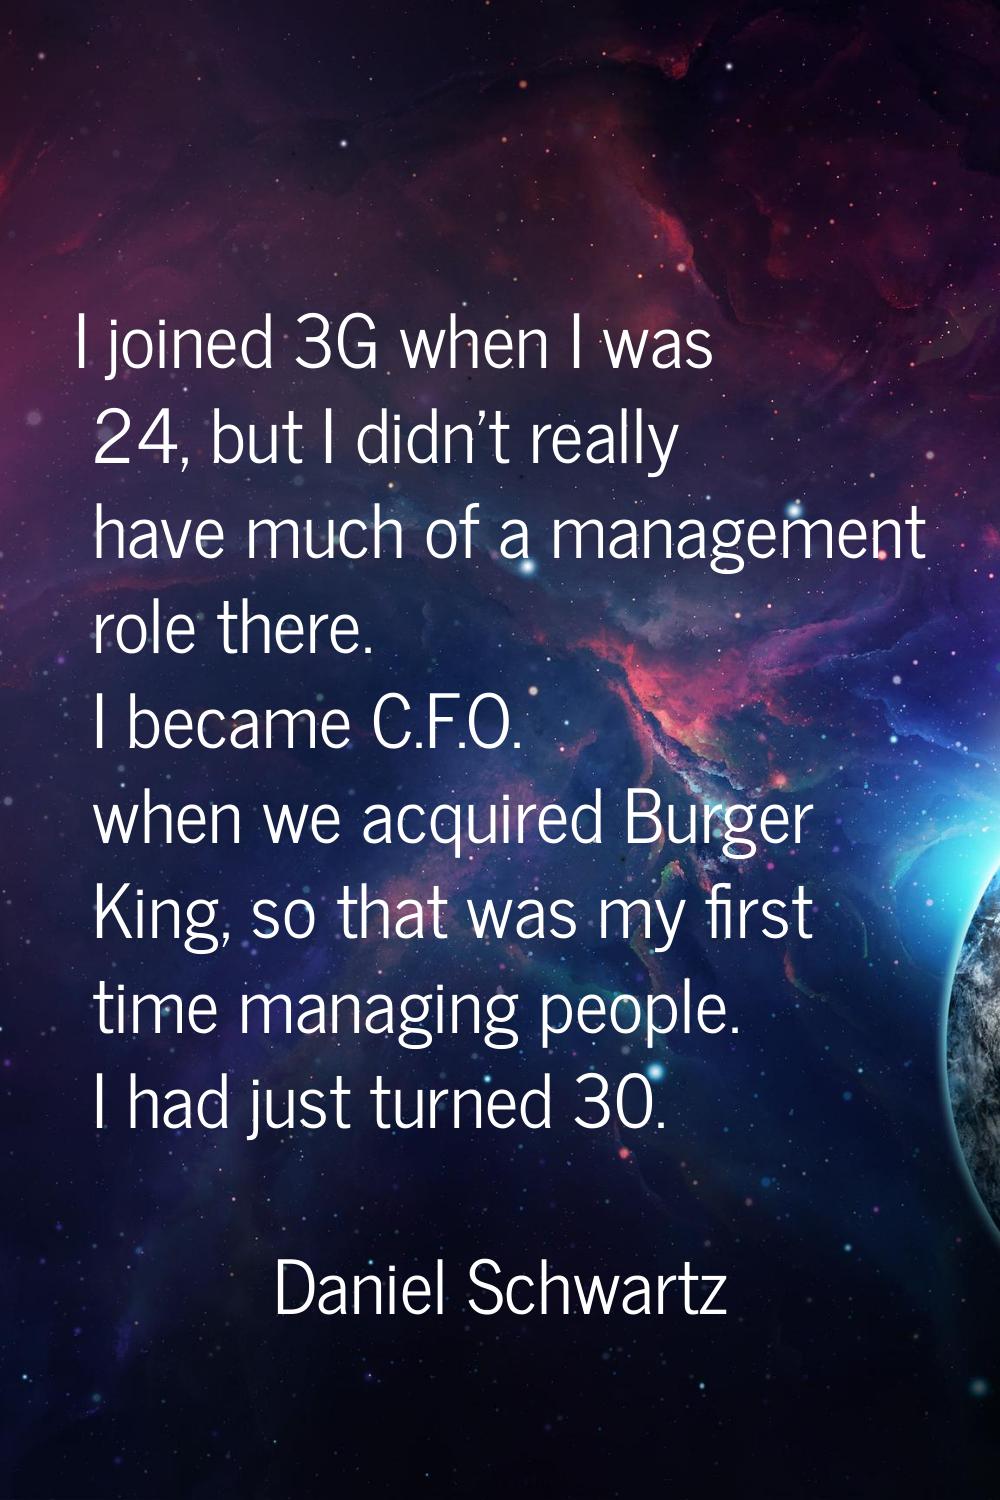 I joined 3G when I was 24, but I didn't really have much of a management role there. I became C.F.O